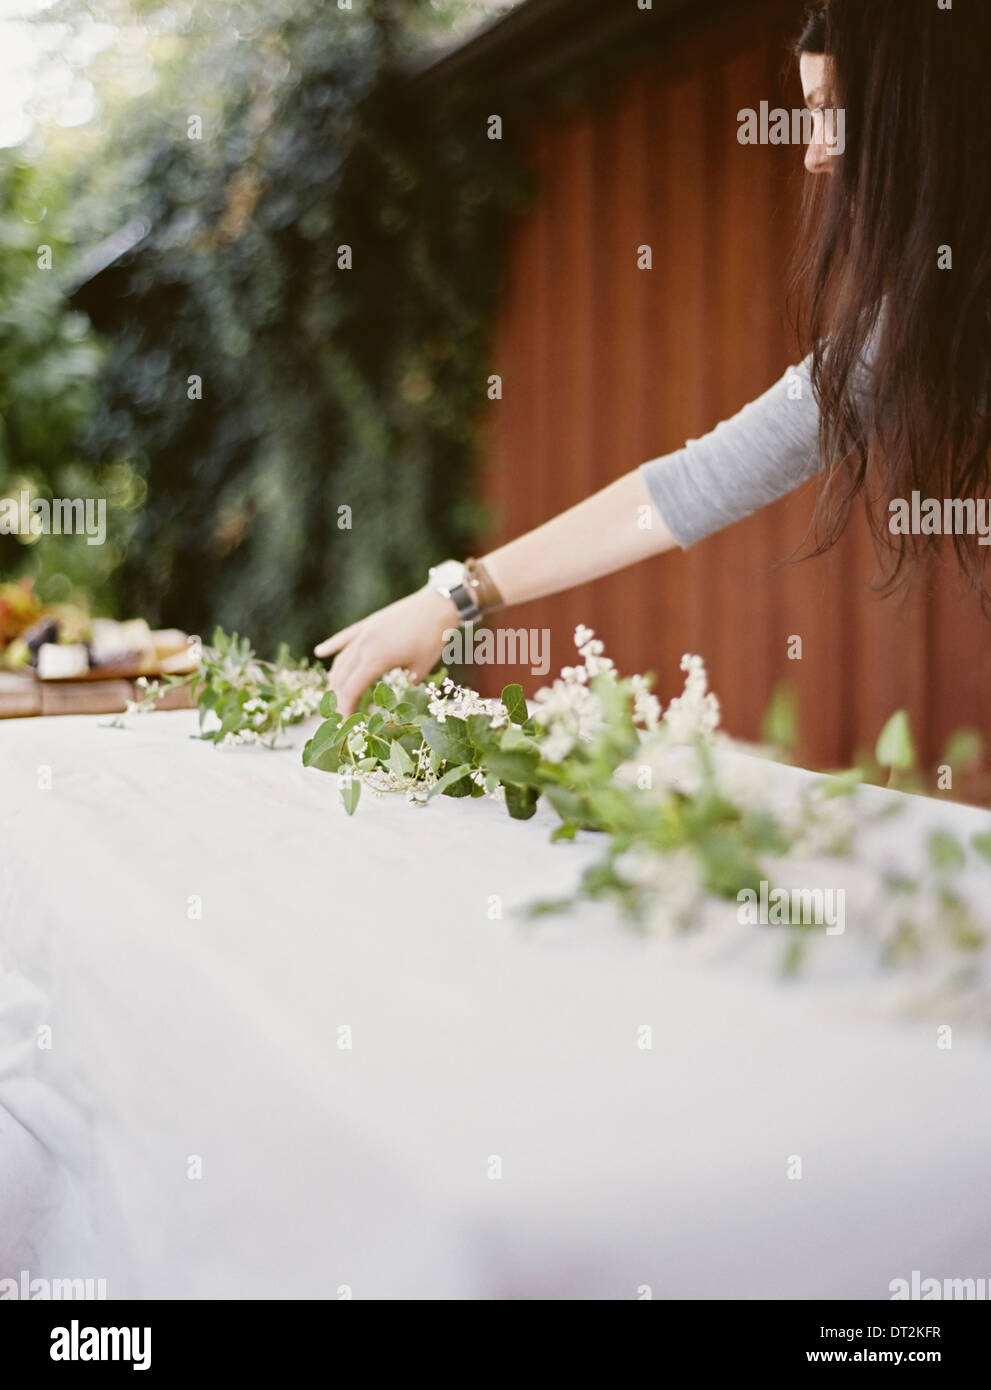 A woman with long hair by table laid outside with a white cloth and central foliage table decoration Place settings Stock Photo